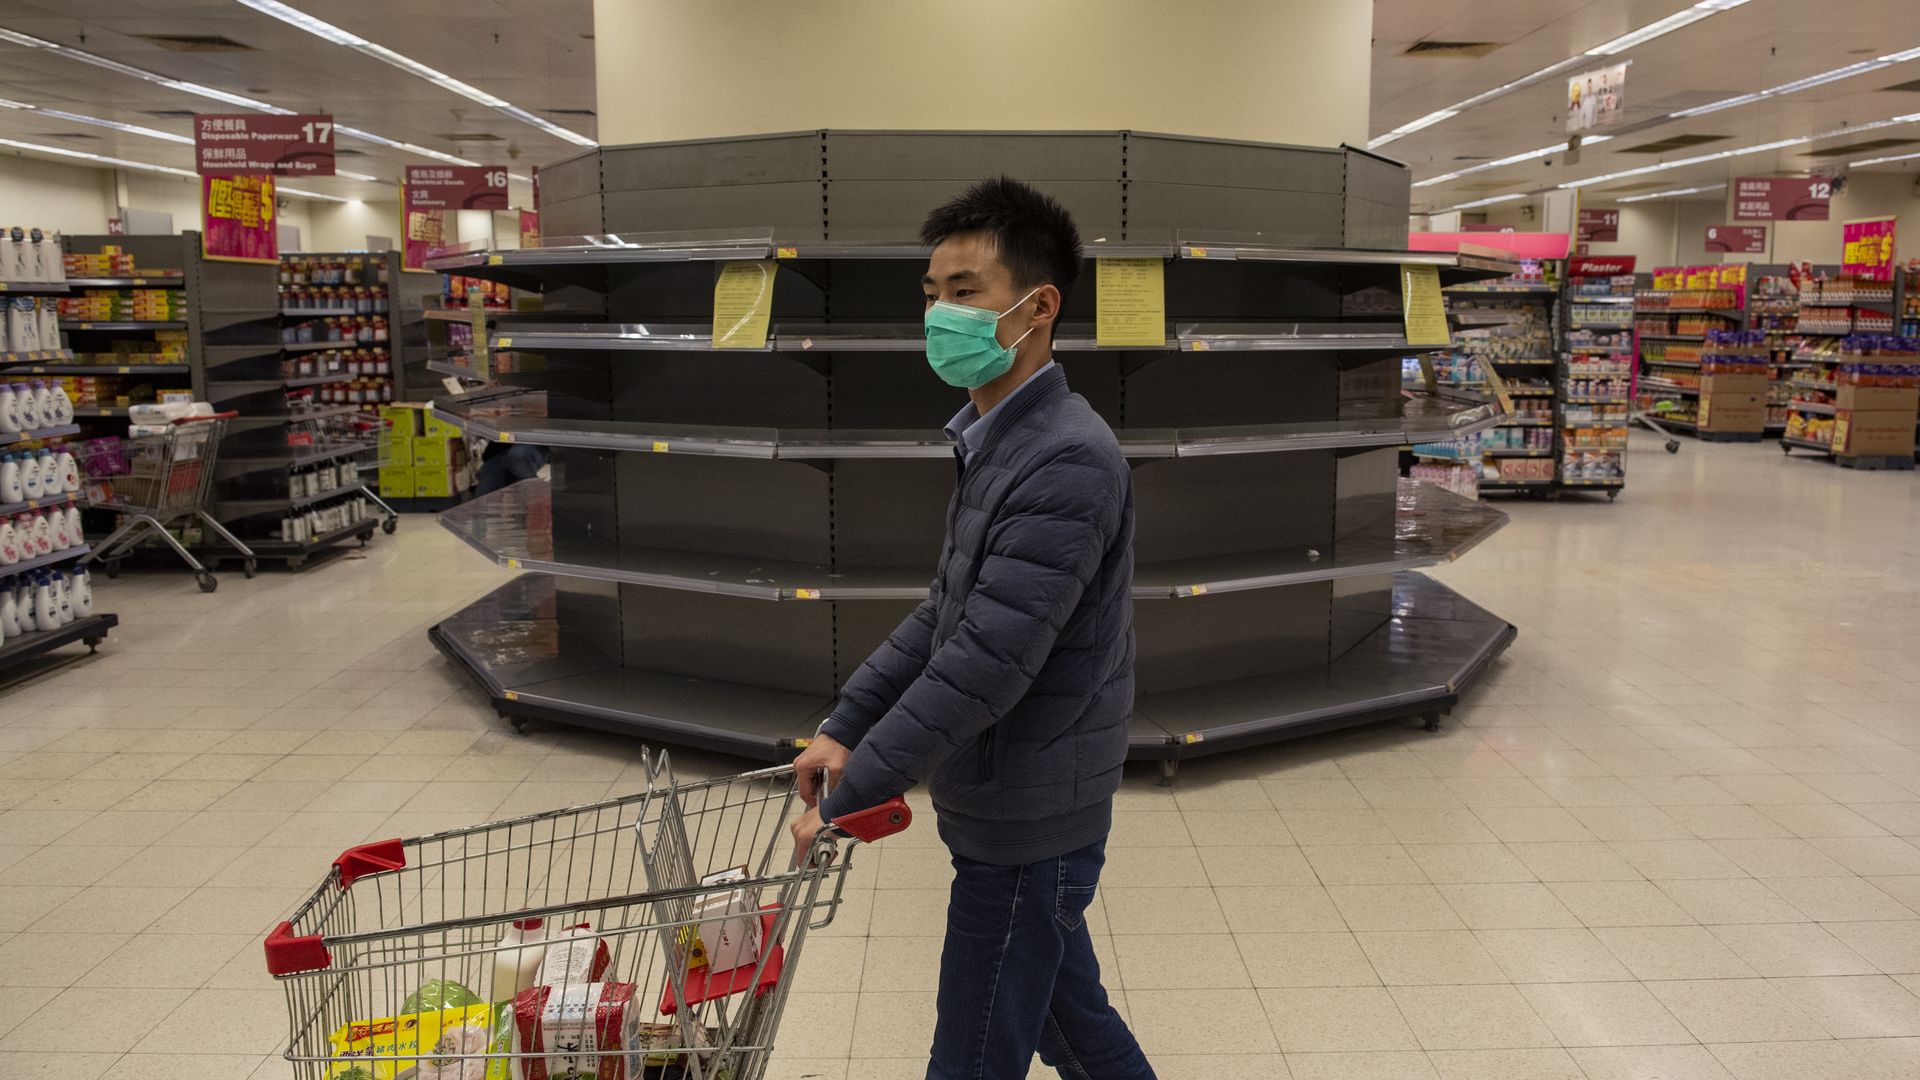 In this image, a man pushes a shopping cart past empty shelves while wearing a face mask.